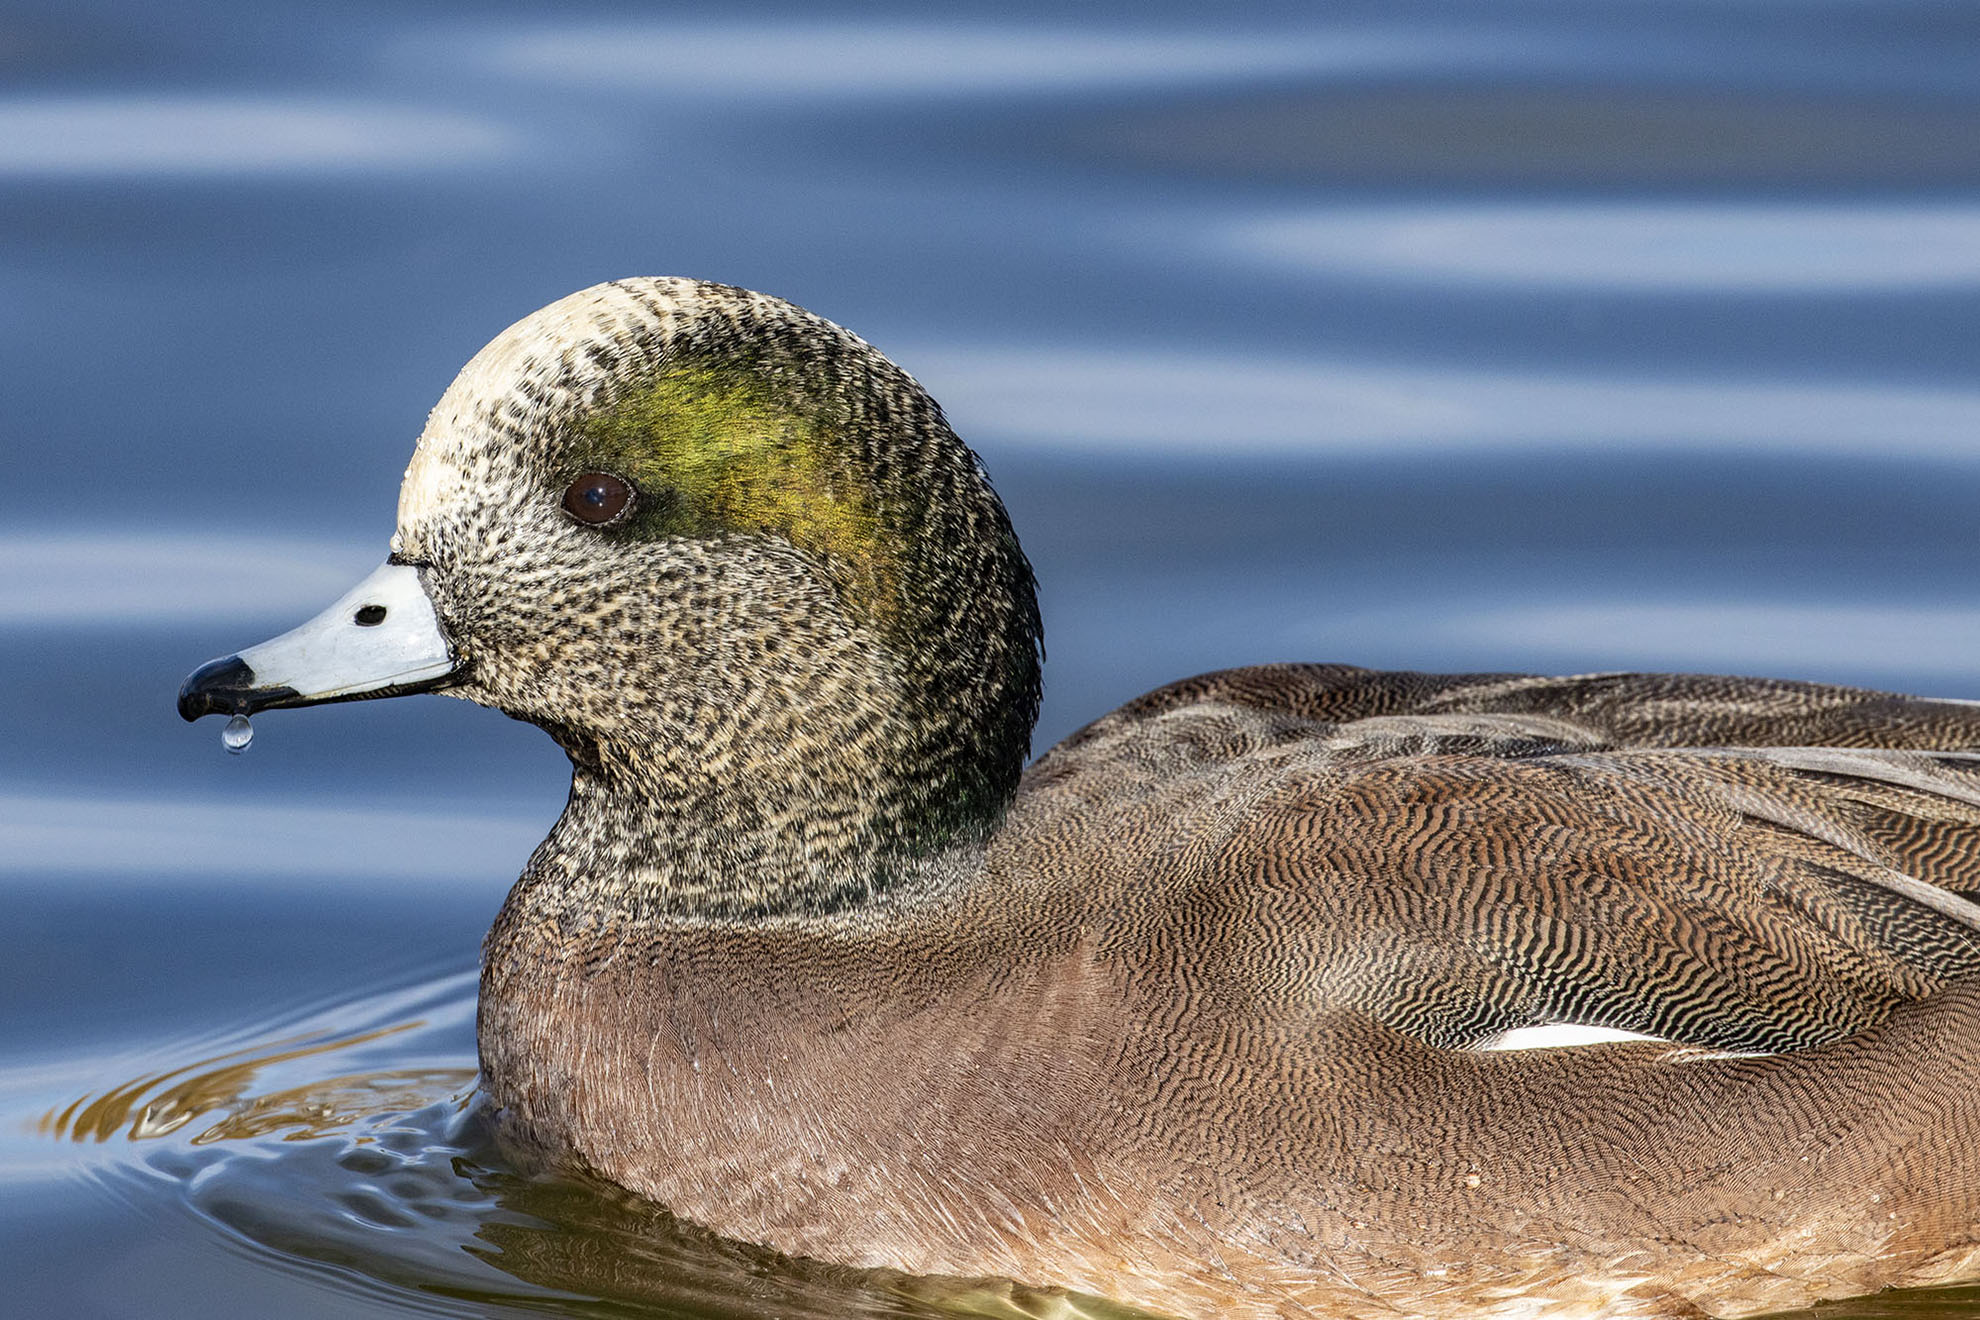 Image of an American wigeon male duck on a lake